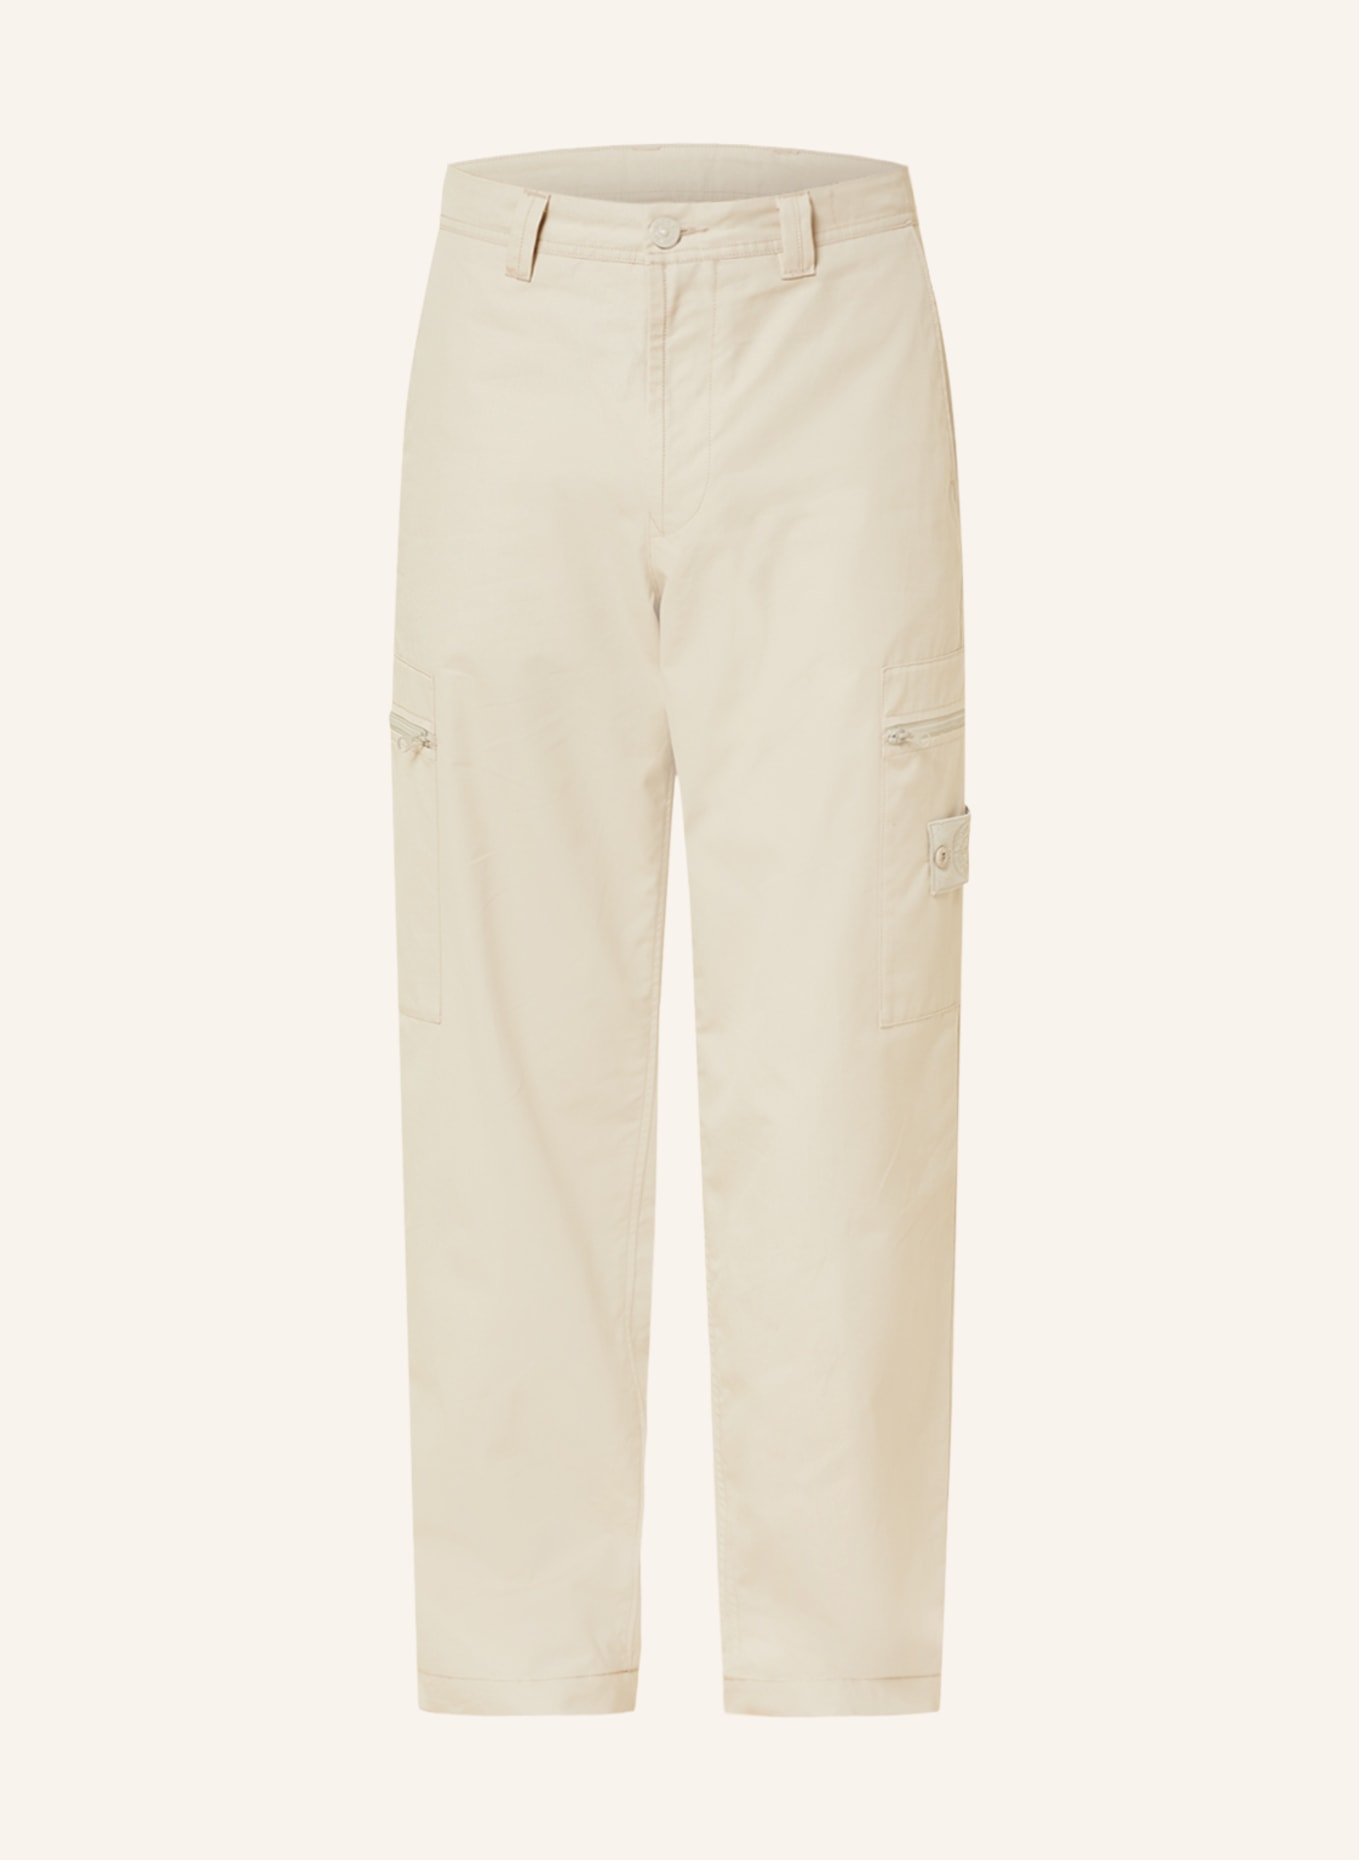 STONE ISLAND Cargo pants GHOST, Color: BEIGE (Image 1)